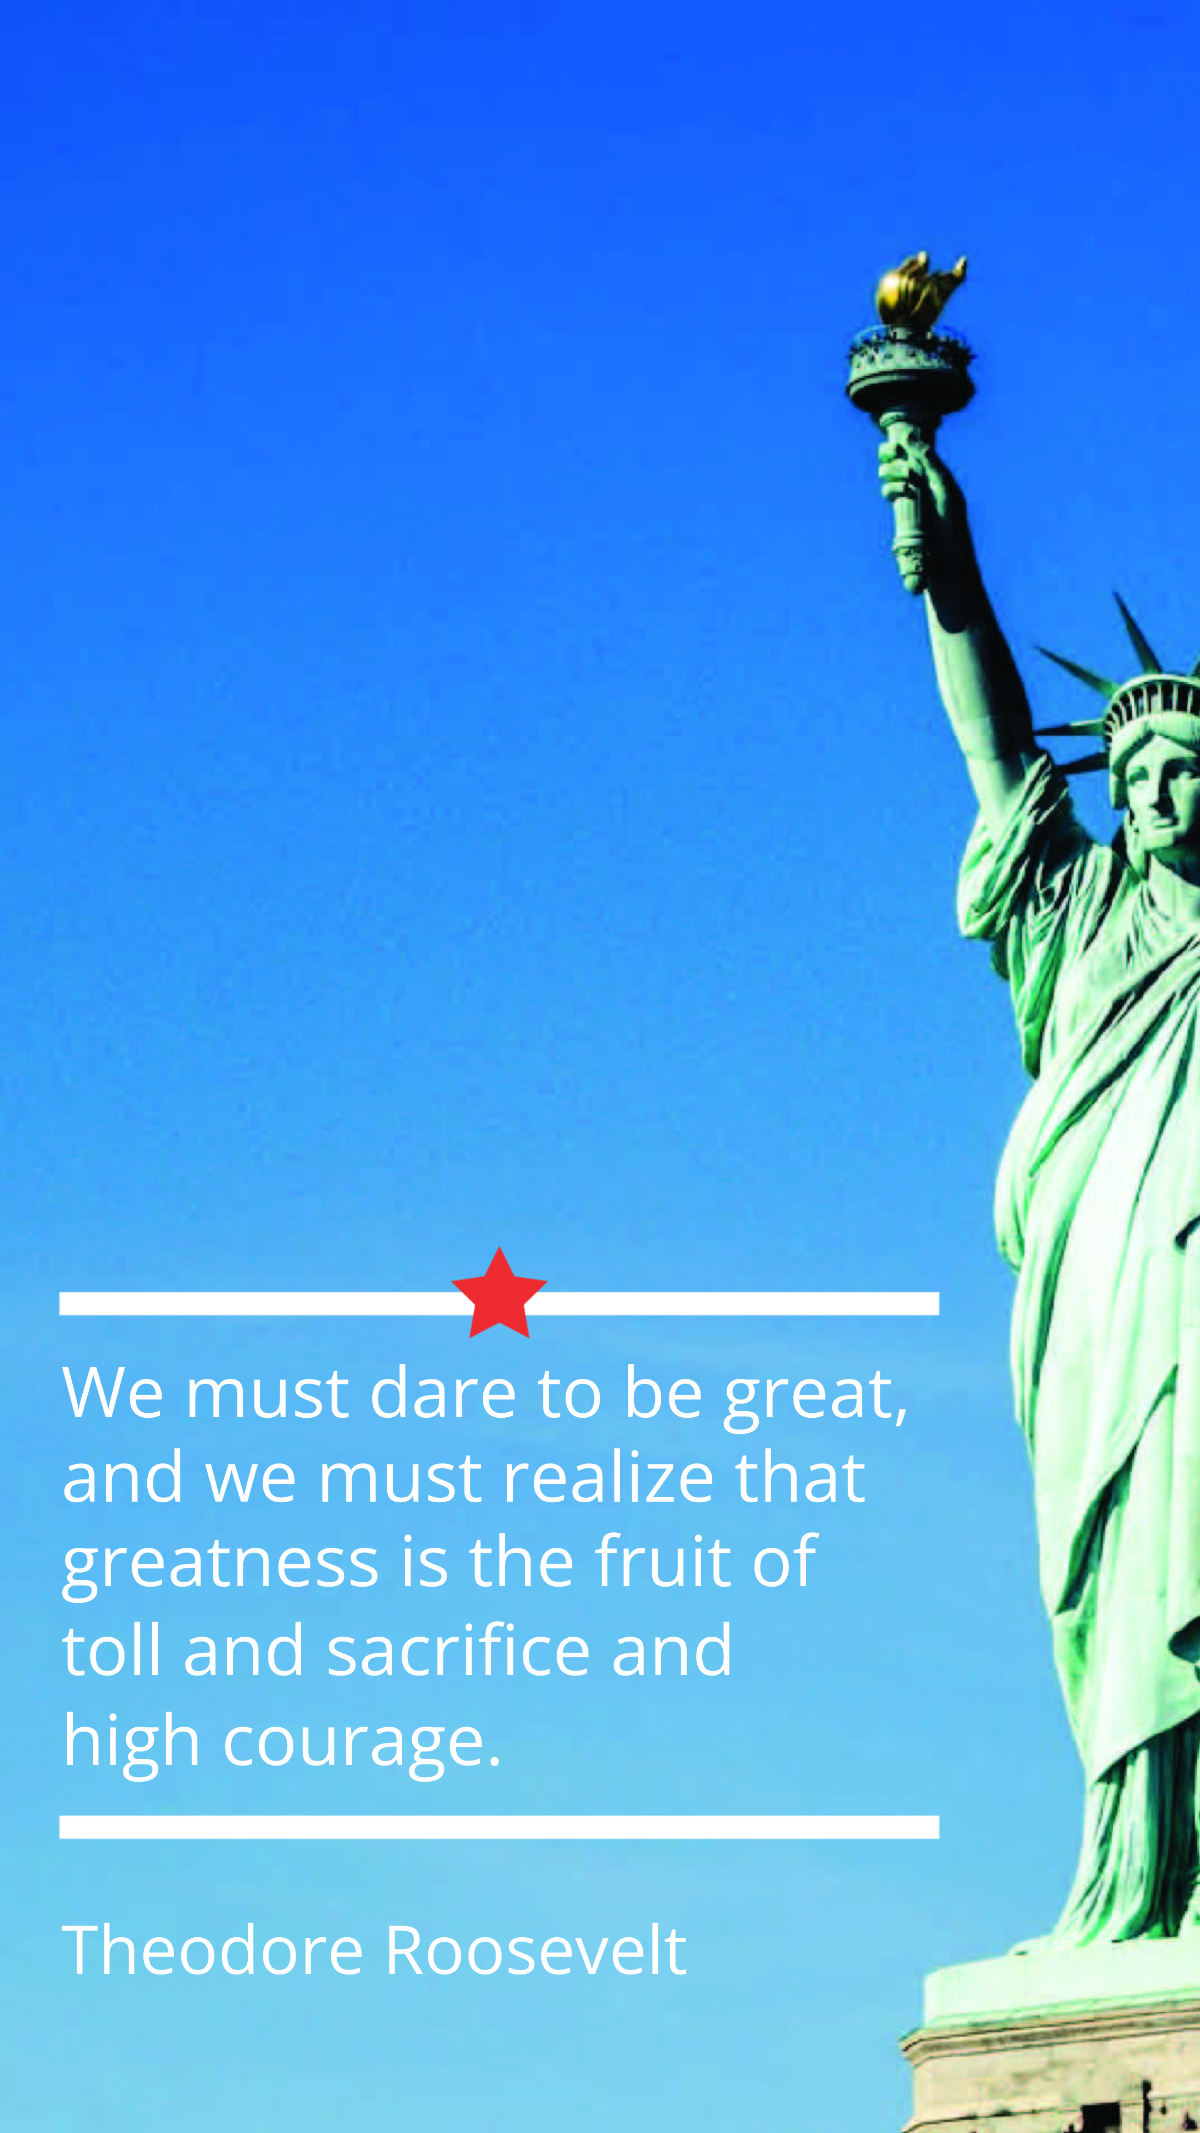 Free Theodore Roosevelt - We must dare to be great, and we must realize that greatness is the fruit of toll and sacrifice and high courage. Template